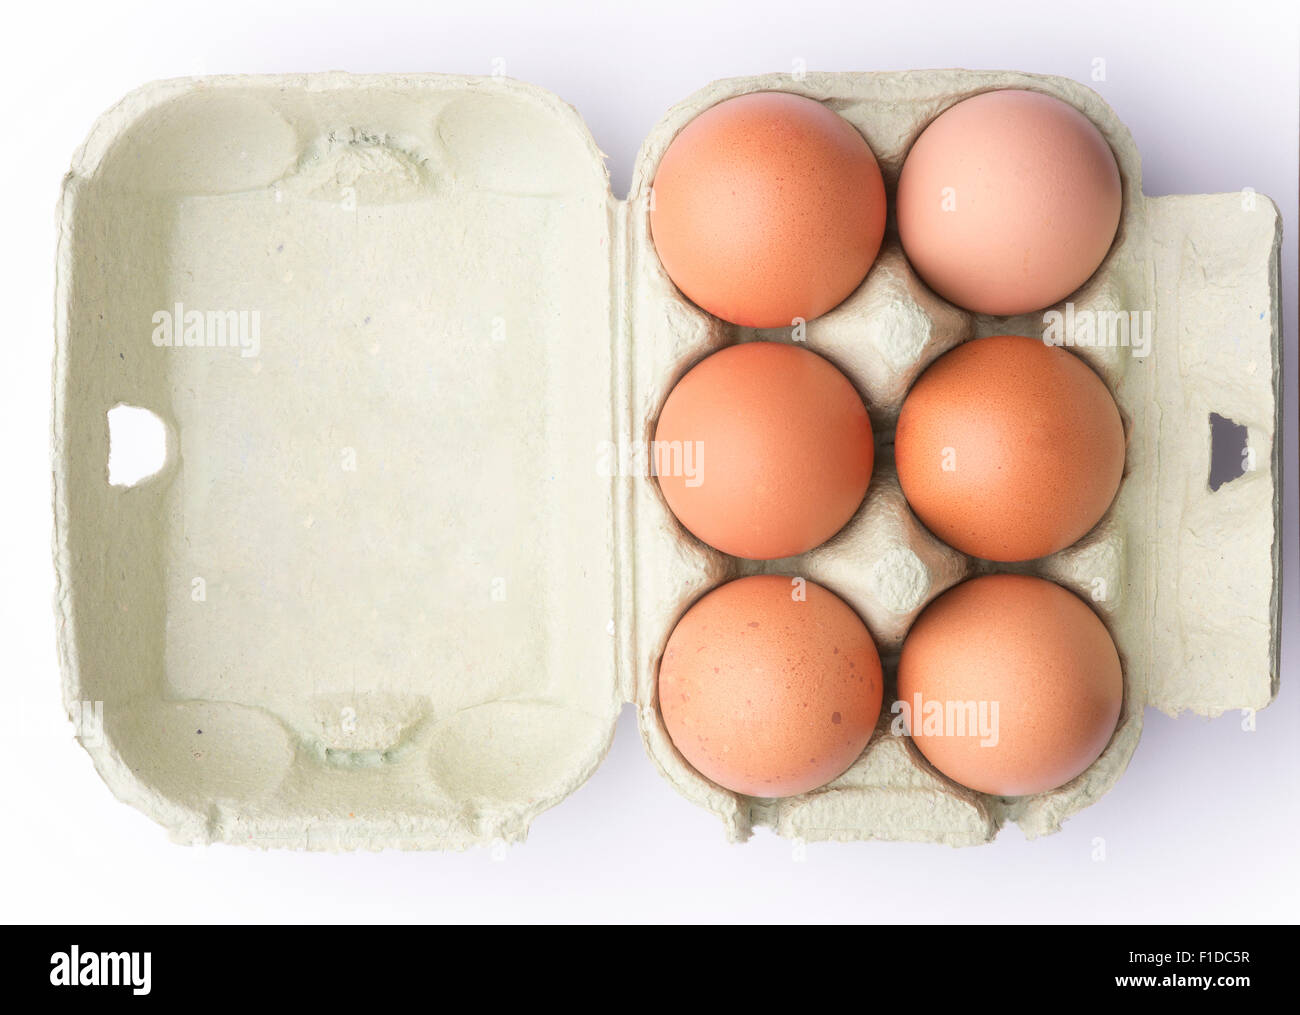 Six brown eggs in a carton isolated on a white background. Stock Photo